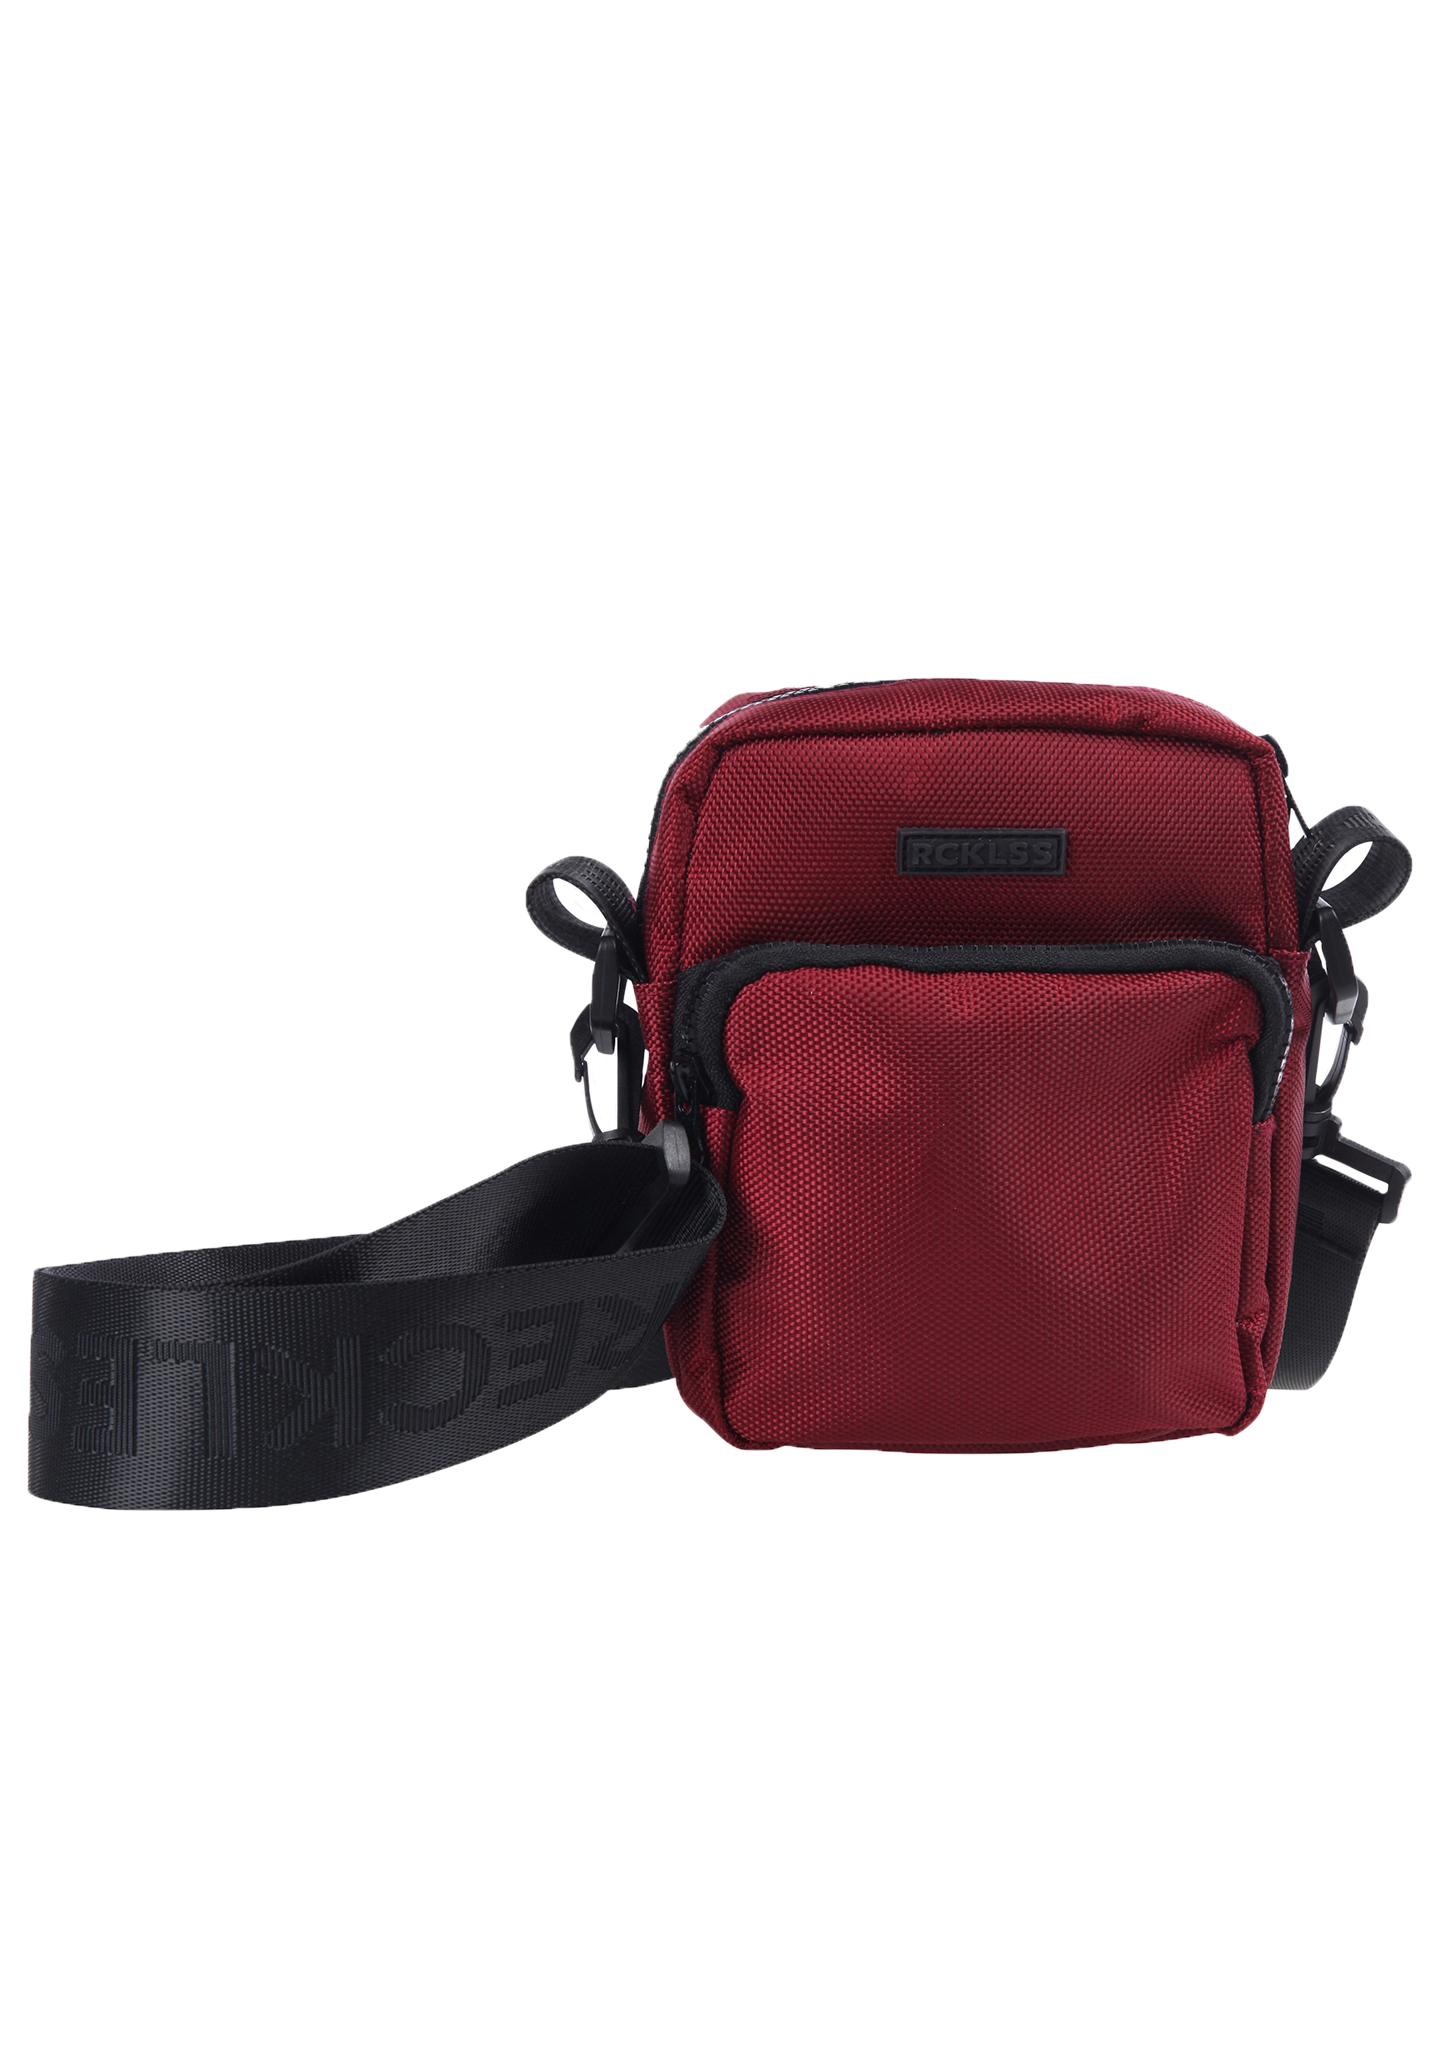 Young and Reckless Core Shoulderbag Umhängetaschen burgundy One Size